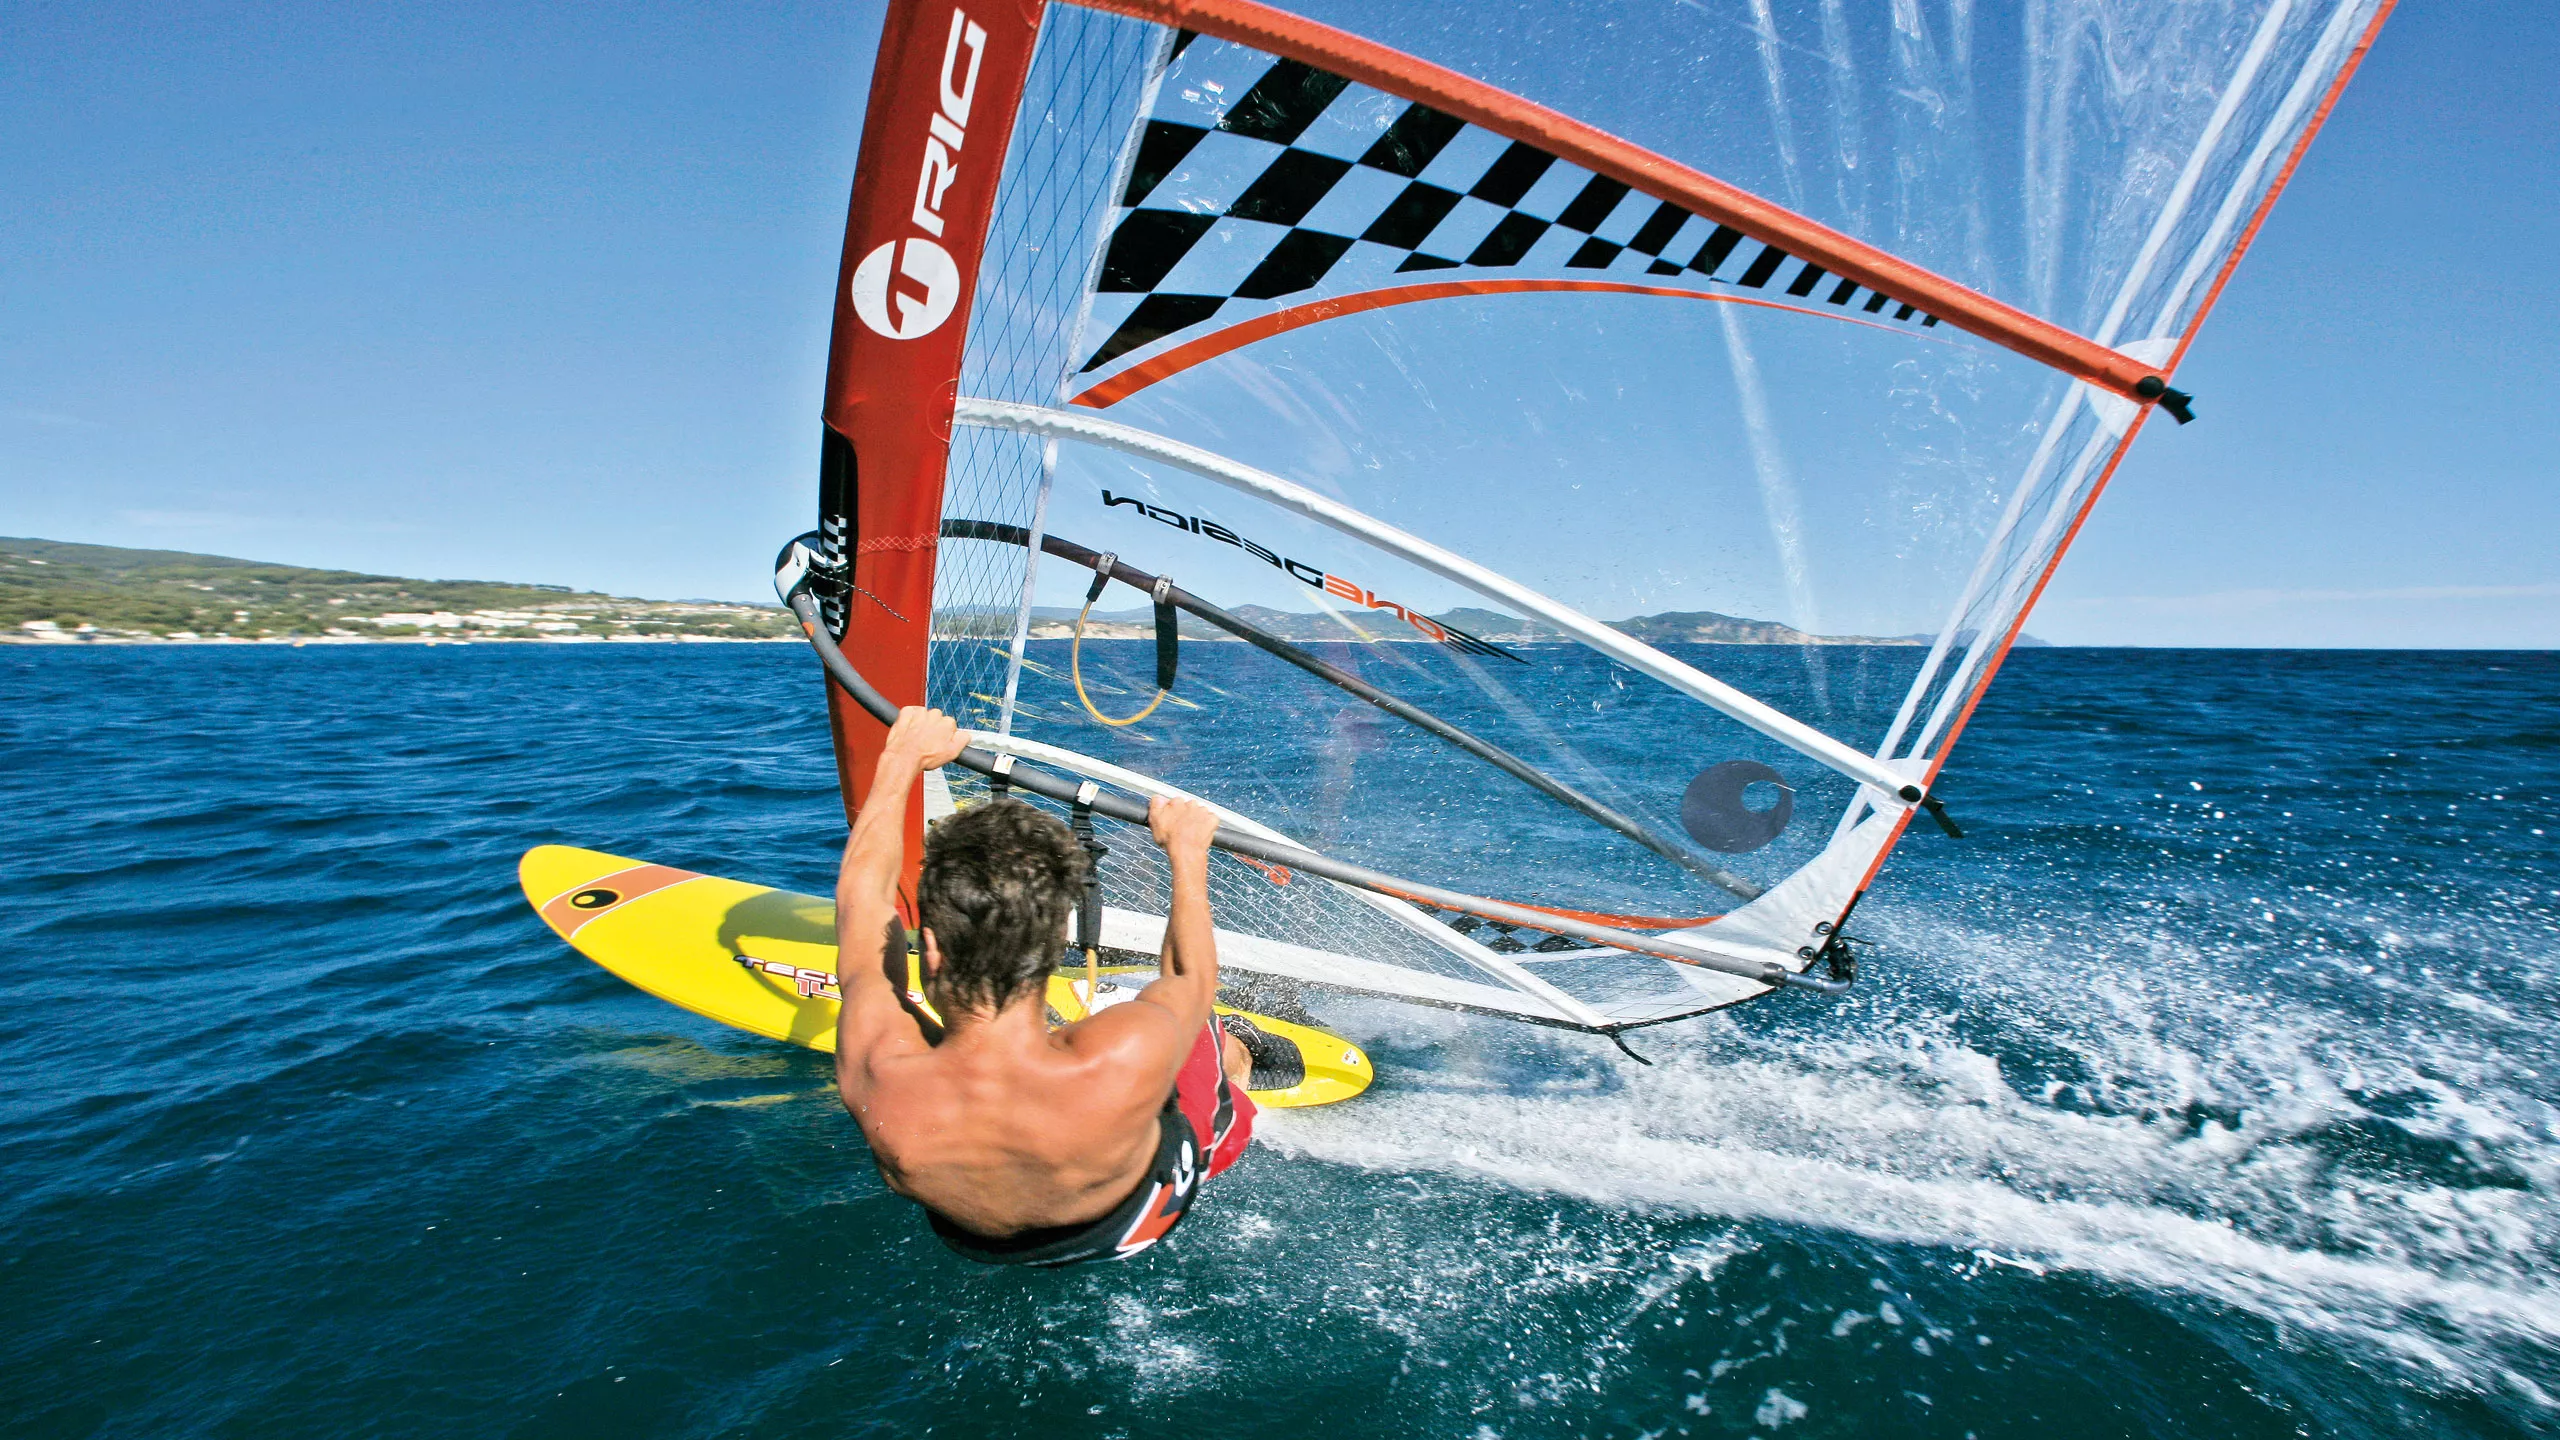 CNPA Ile De Re in France, Europe | Windsurfing - Rated 1.2